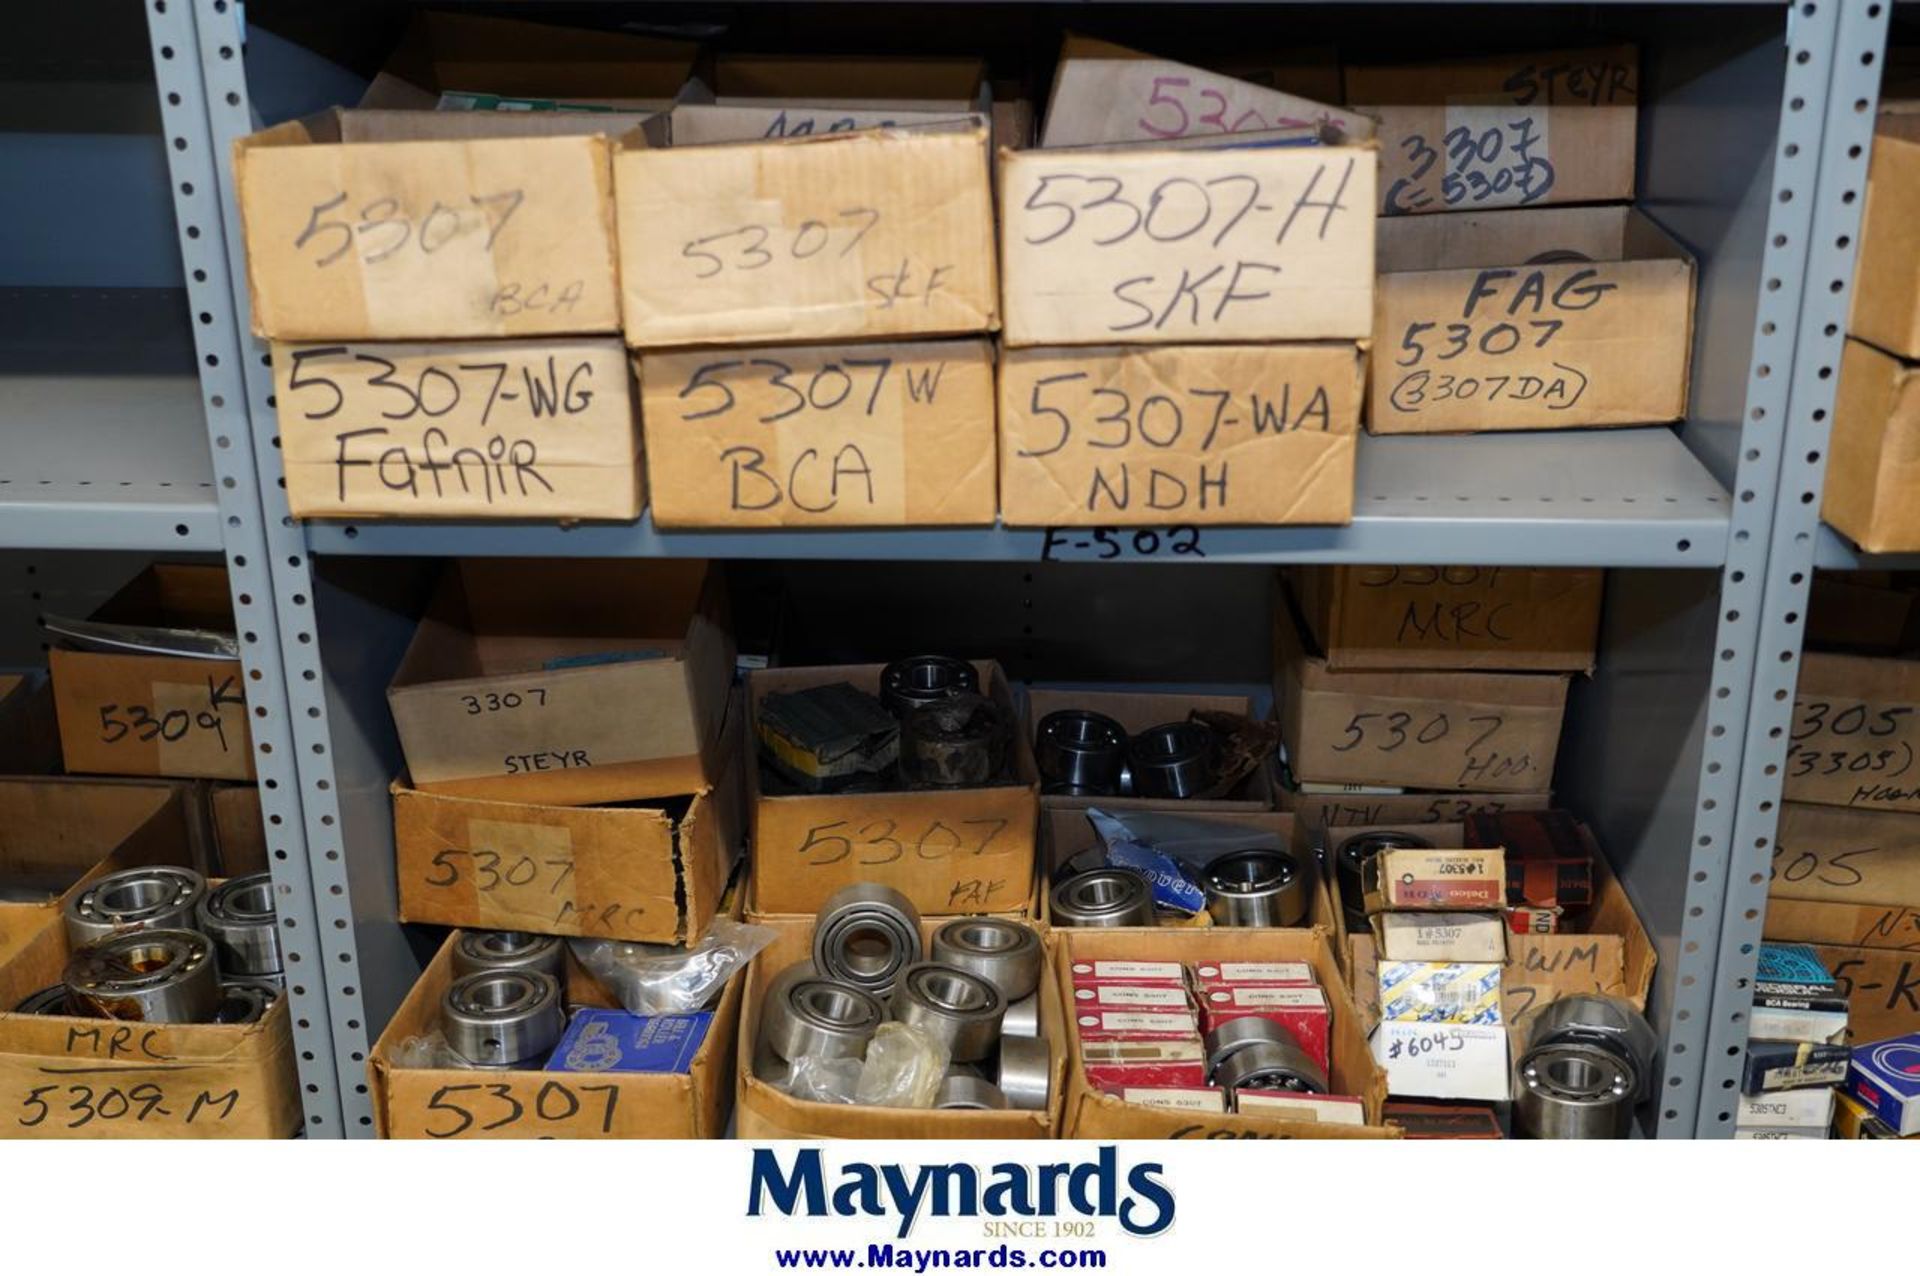 Lot of Assorted RHP,GEN,FAG,ABC,MRC, NSK,BCA, FAF,SKF,Steyr, Open Double Row Bearings - Image 4 of 7